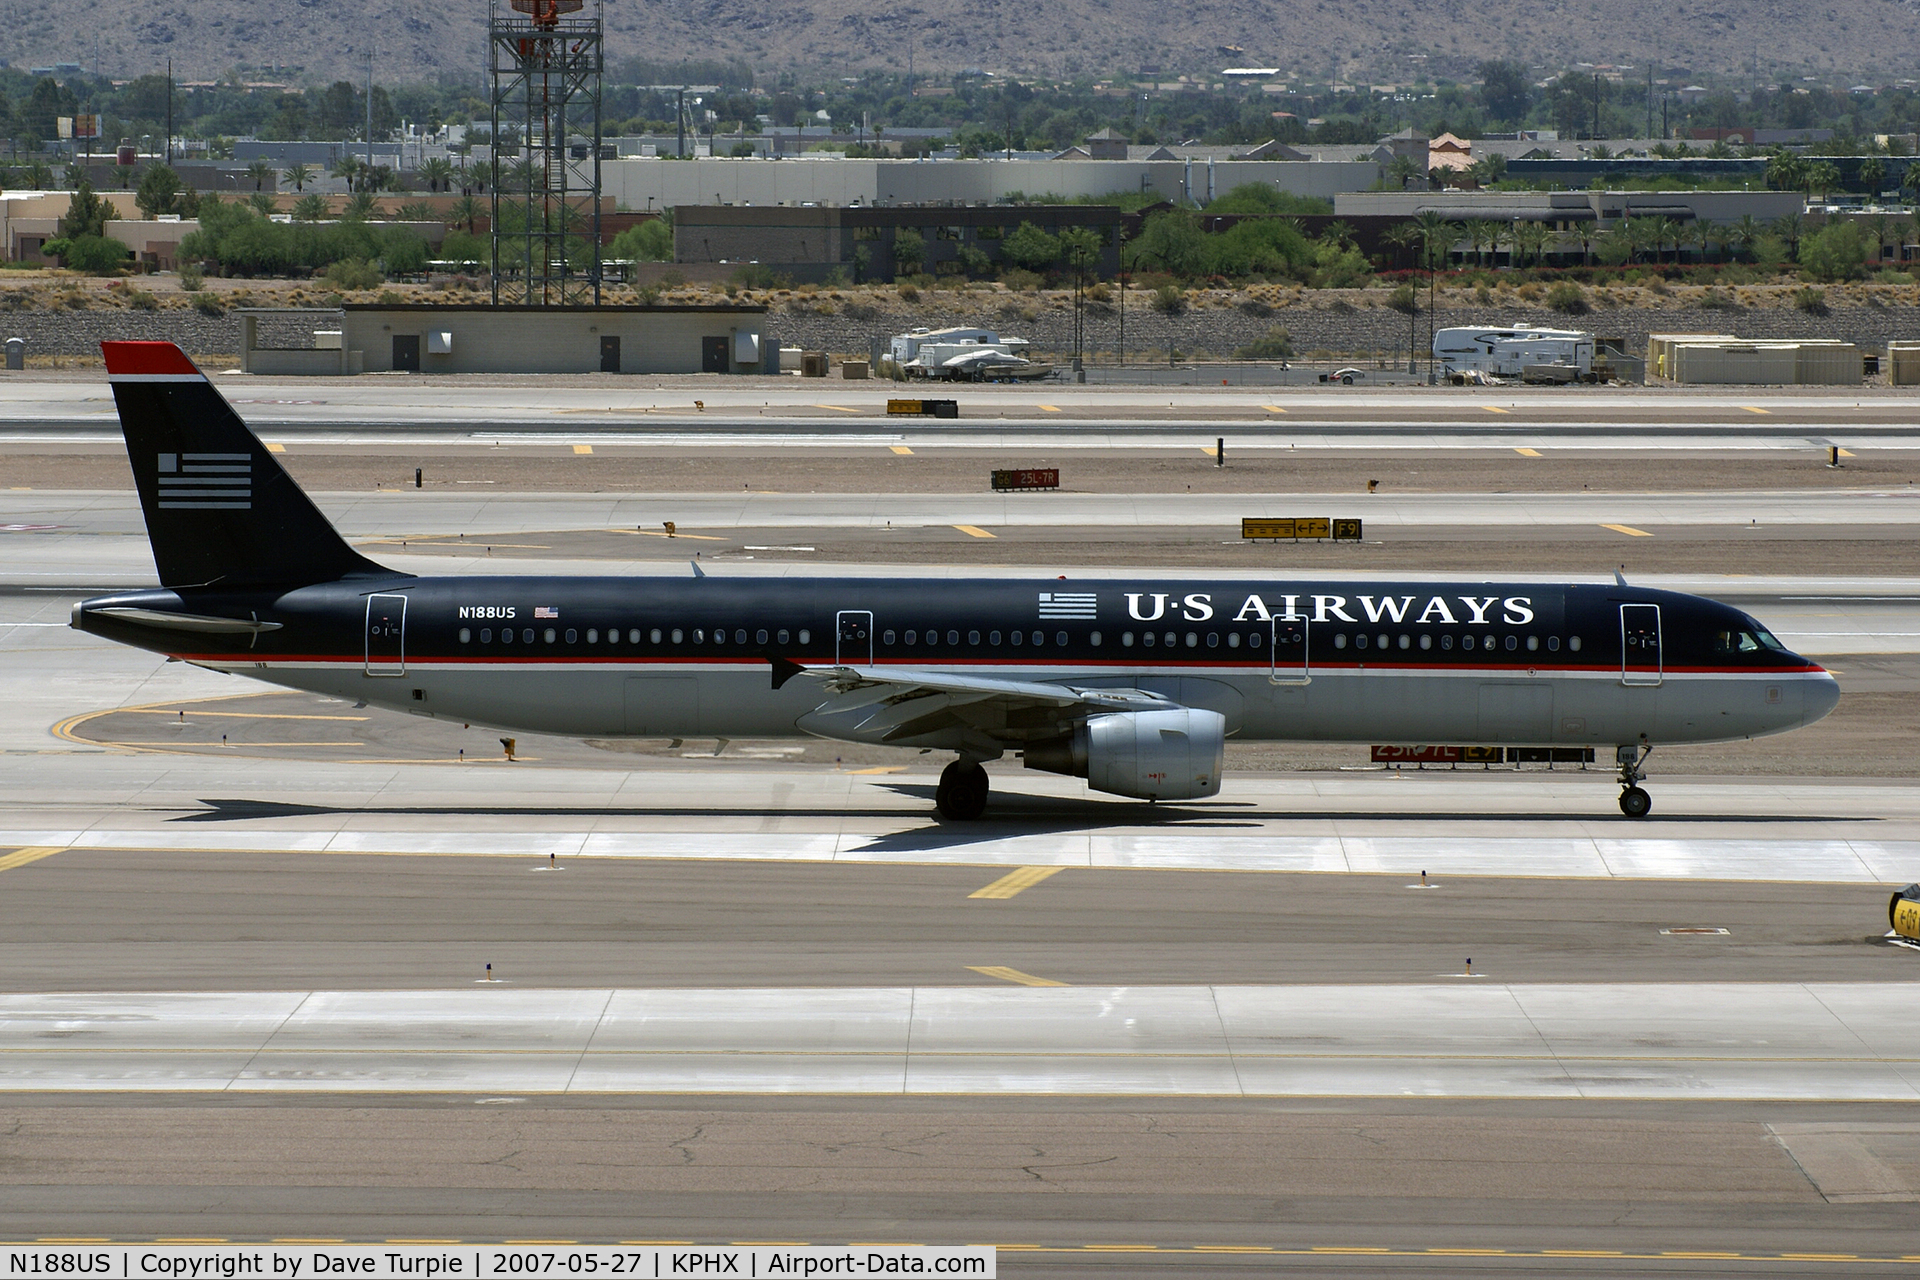 N188US, 2002 Airbus A321-211 C/N 1724, No comment.